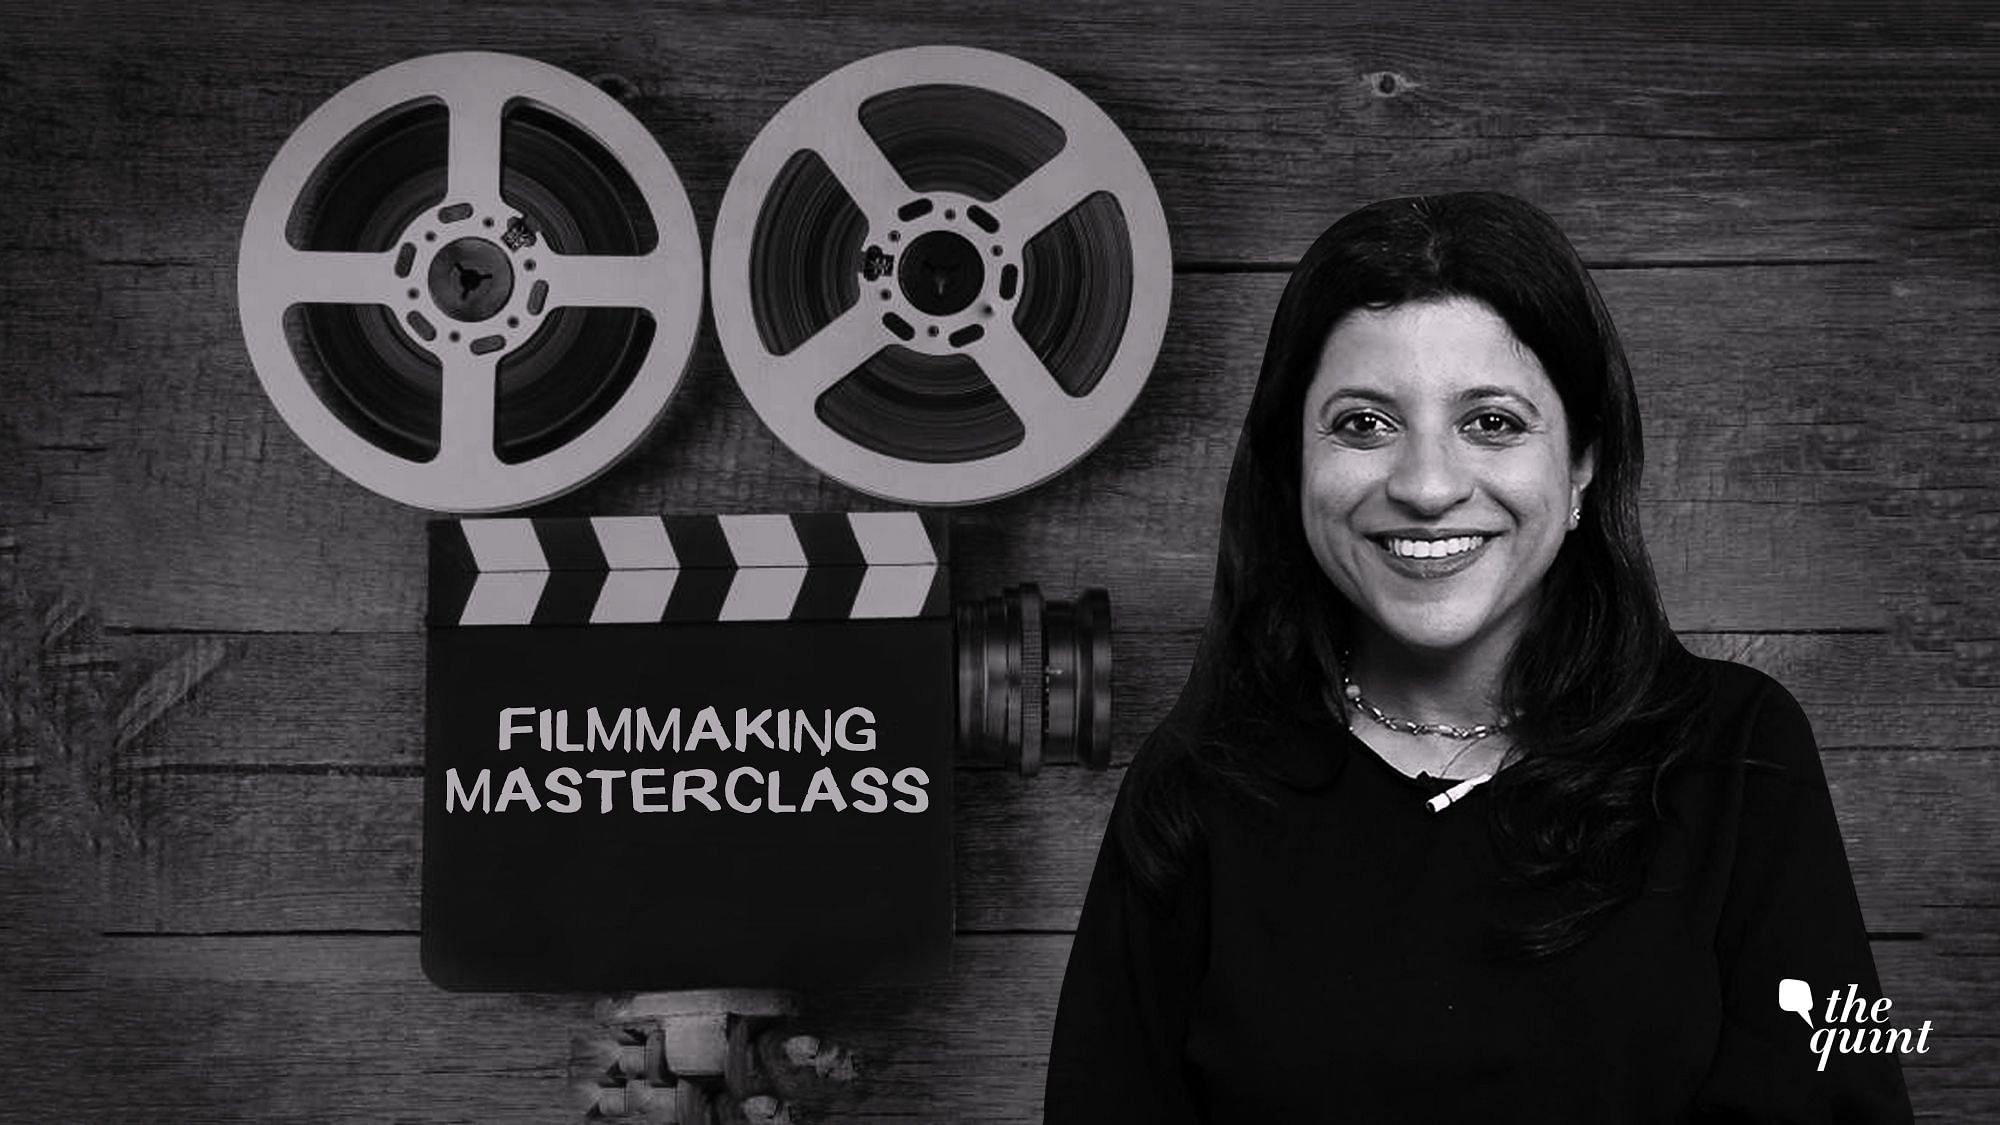 Here’s what we found out about Zoya Akhtar’s film-making process.